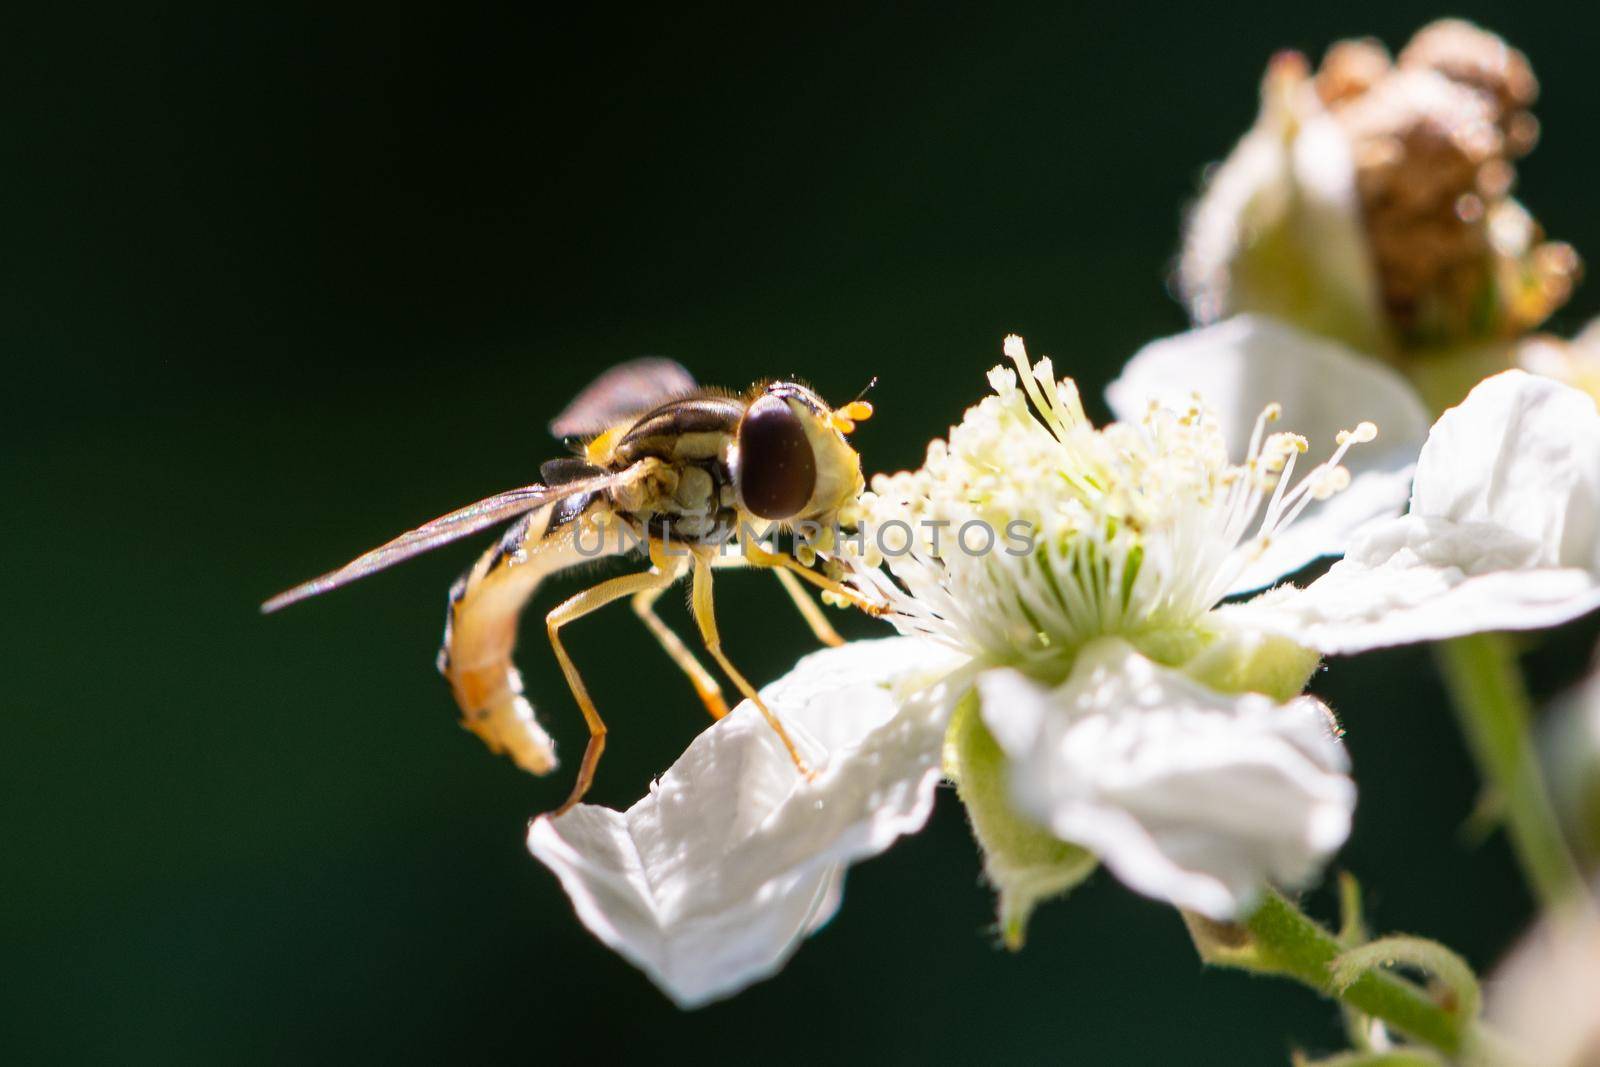 Hoverfly is laying on a white flower, image of insect with a dark background